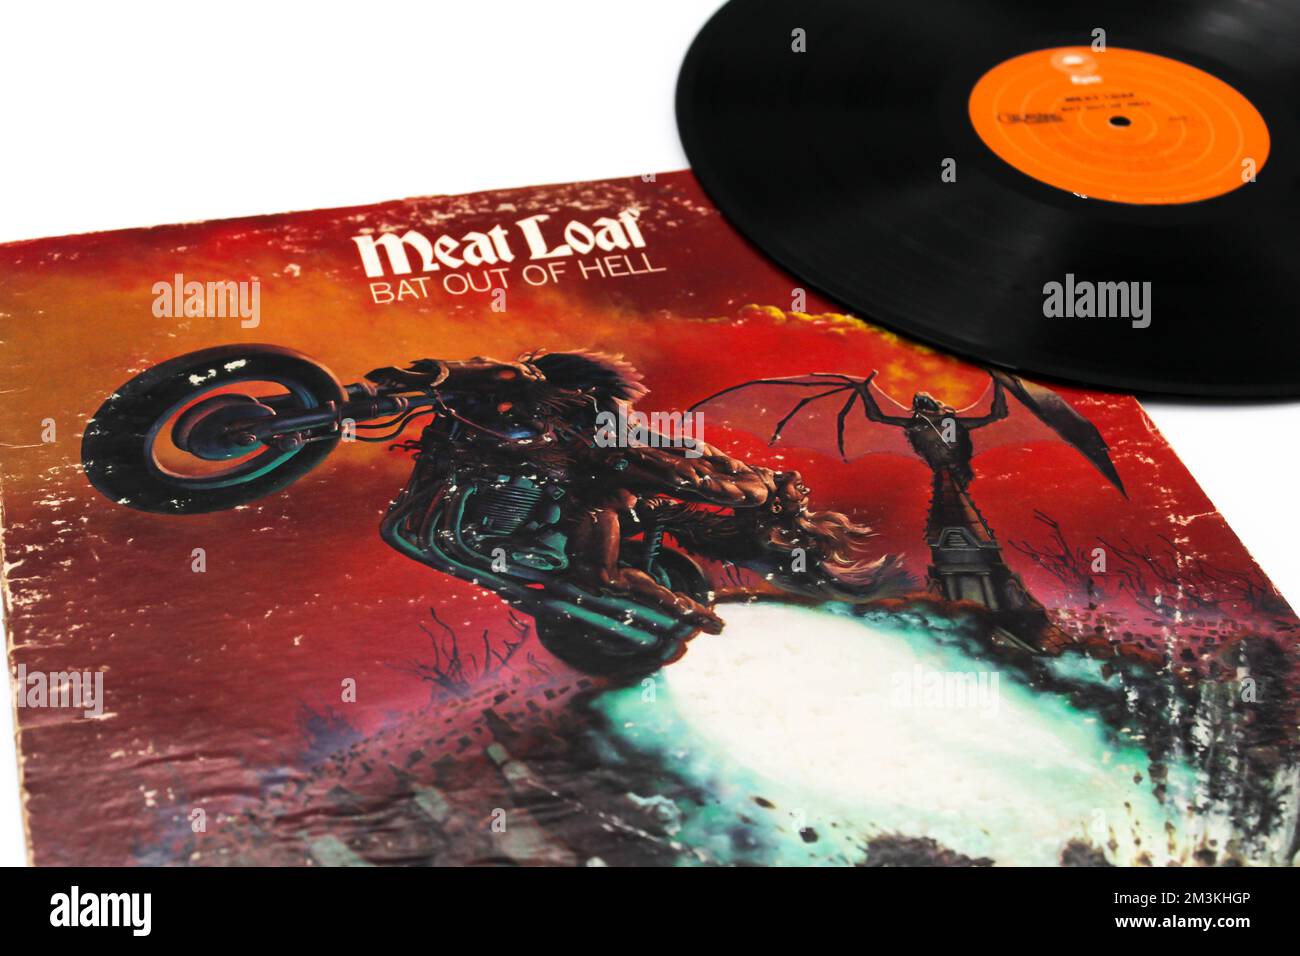 Bat Out of Hell is the 1977 debut album by American rock singer Meat Loaf and composer Jim Steinman. Album cover, on vinyl record. Stock Photo